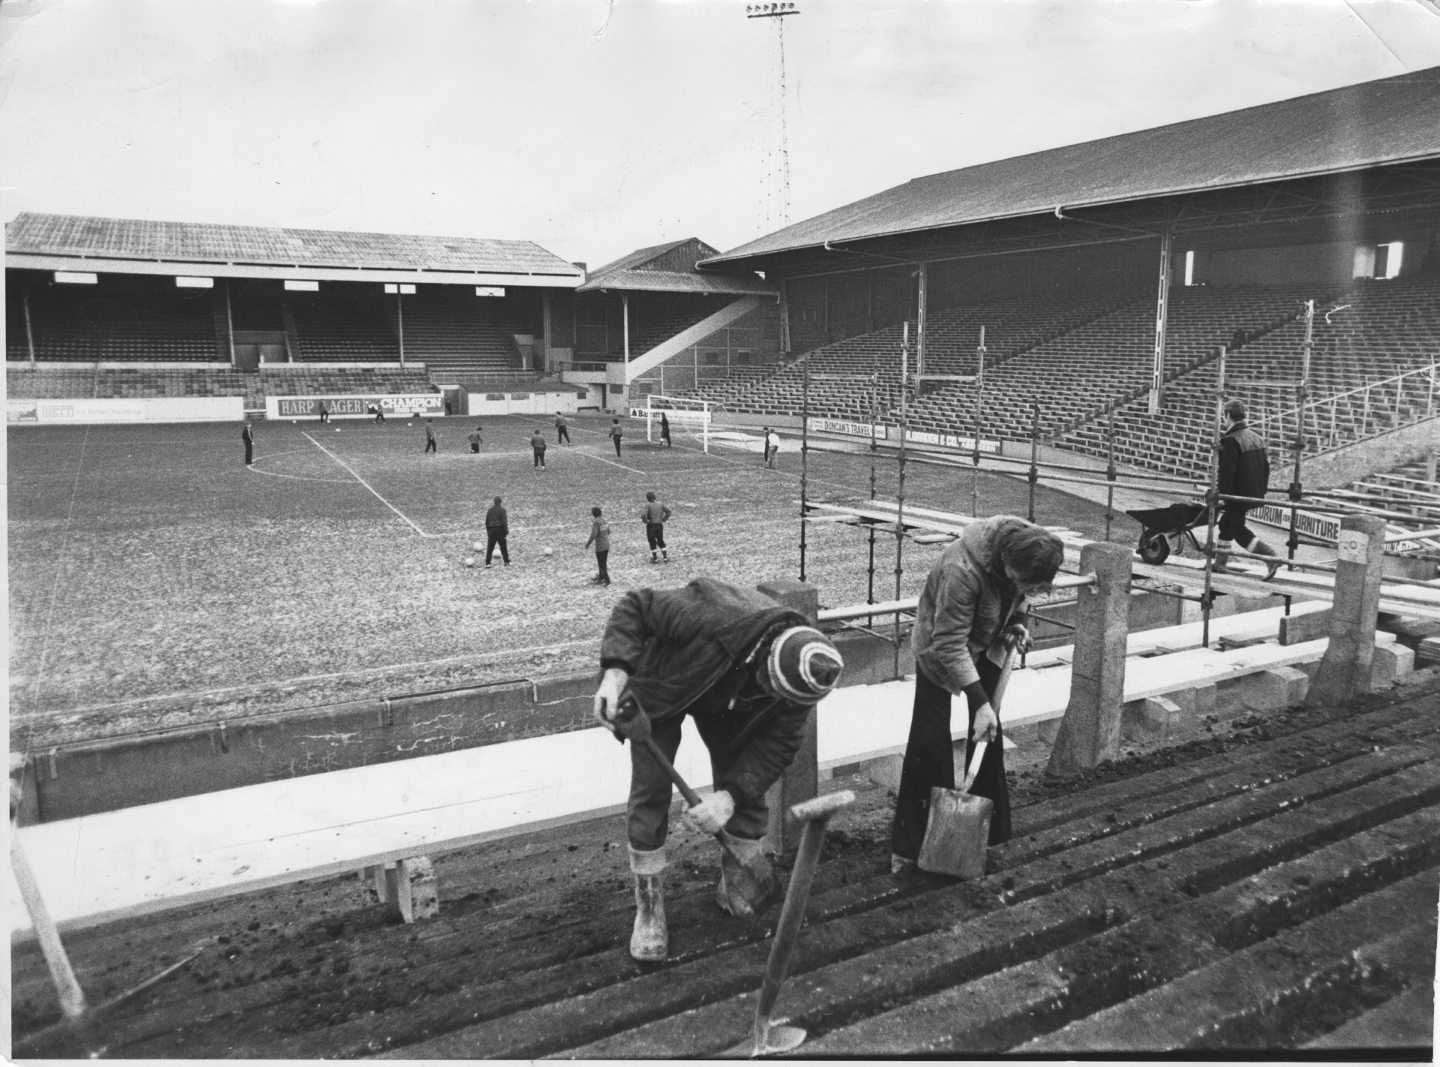 Work began to transform Pittodrie into an all-seater stadium in 1977.